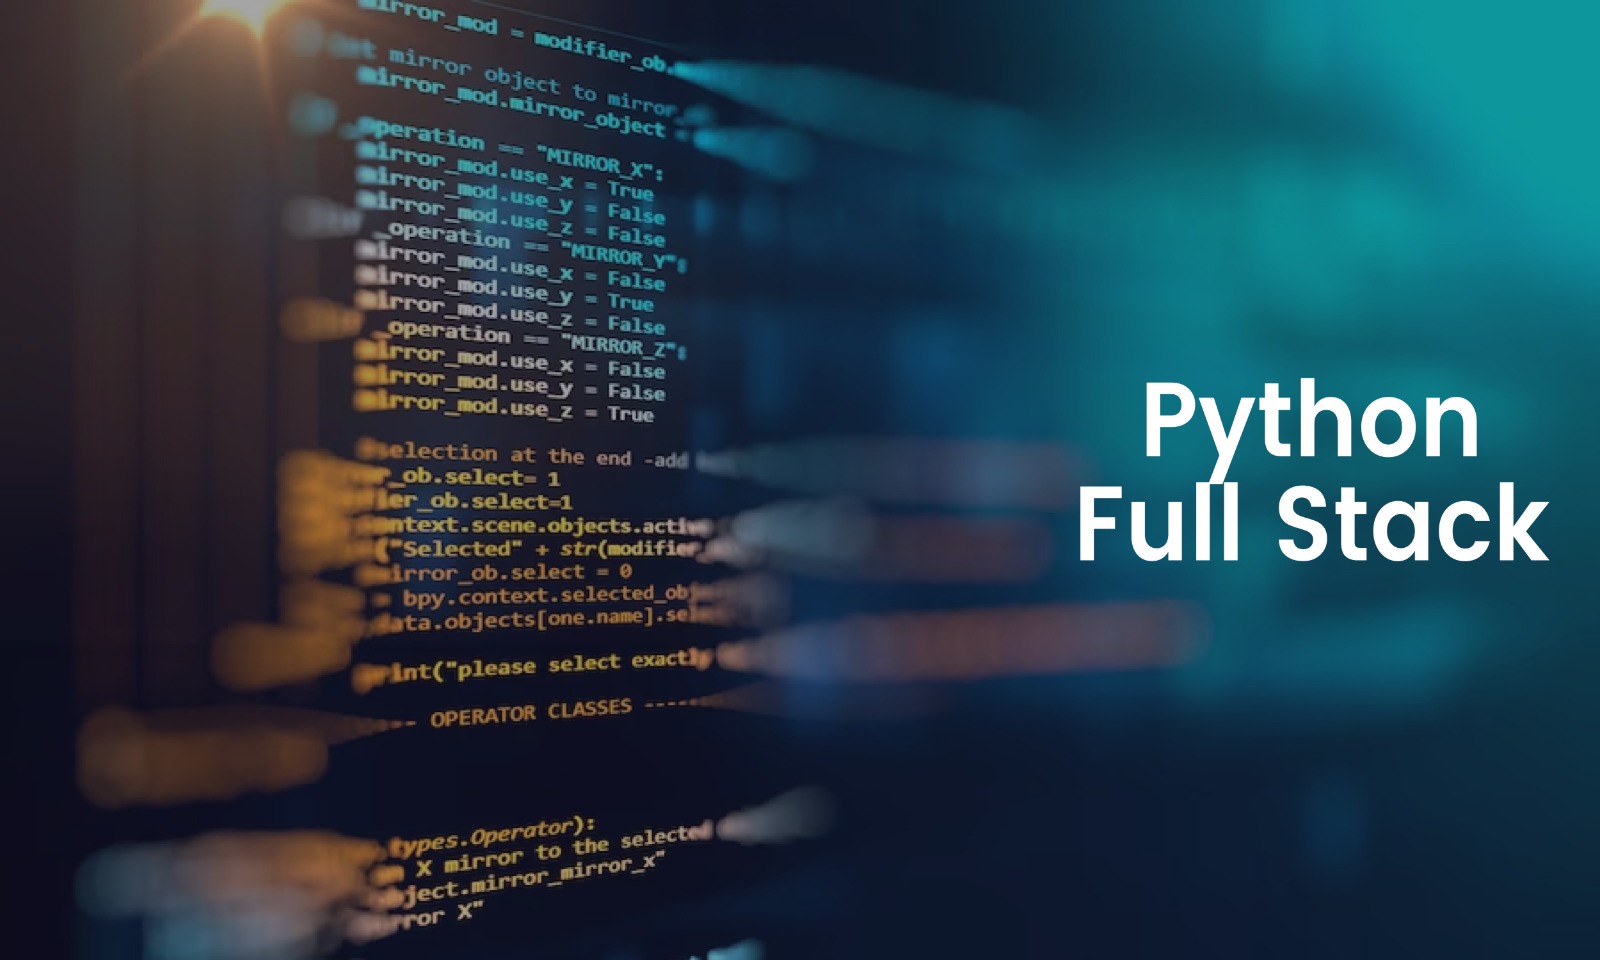 The data is om the screen, Python Full Stack Training In Hyderabad